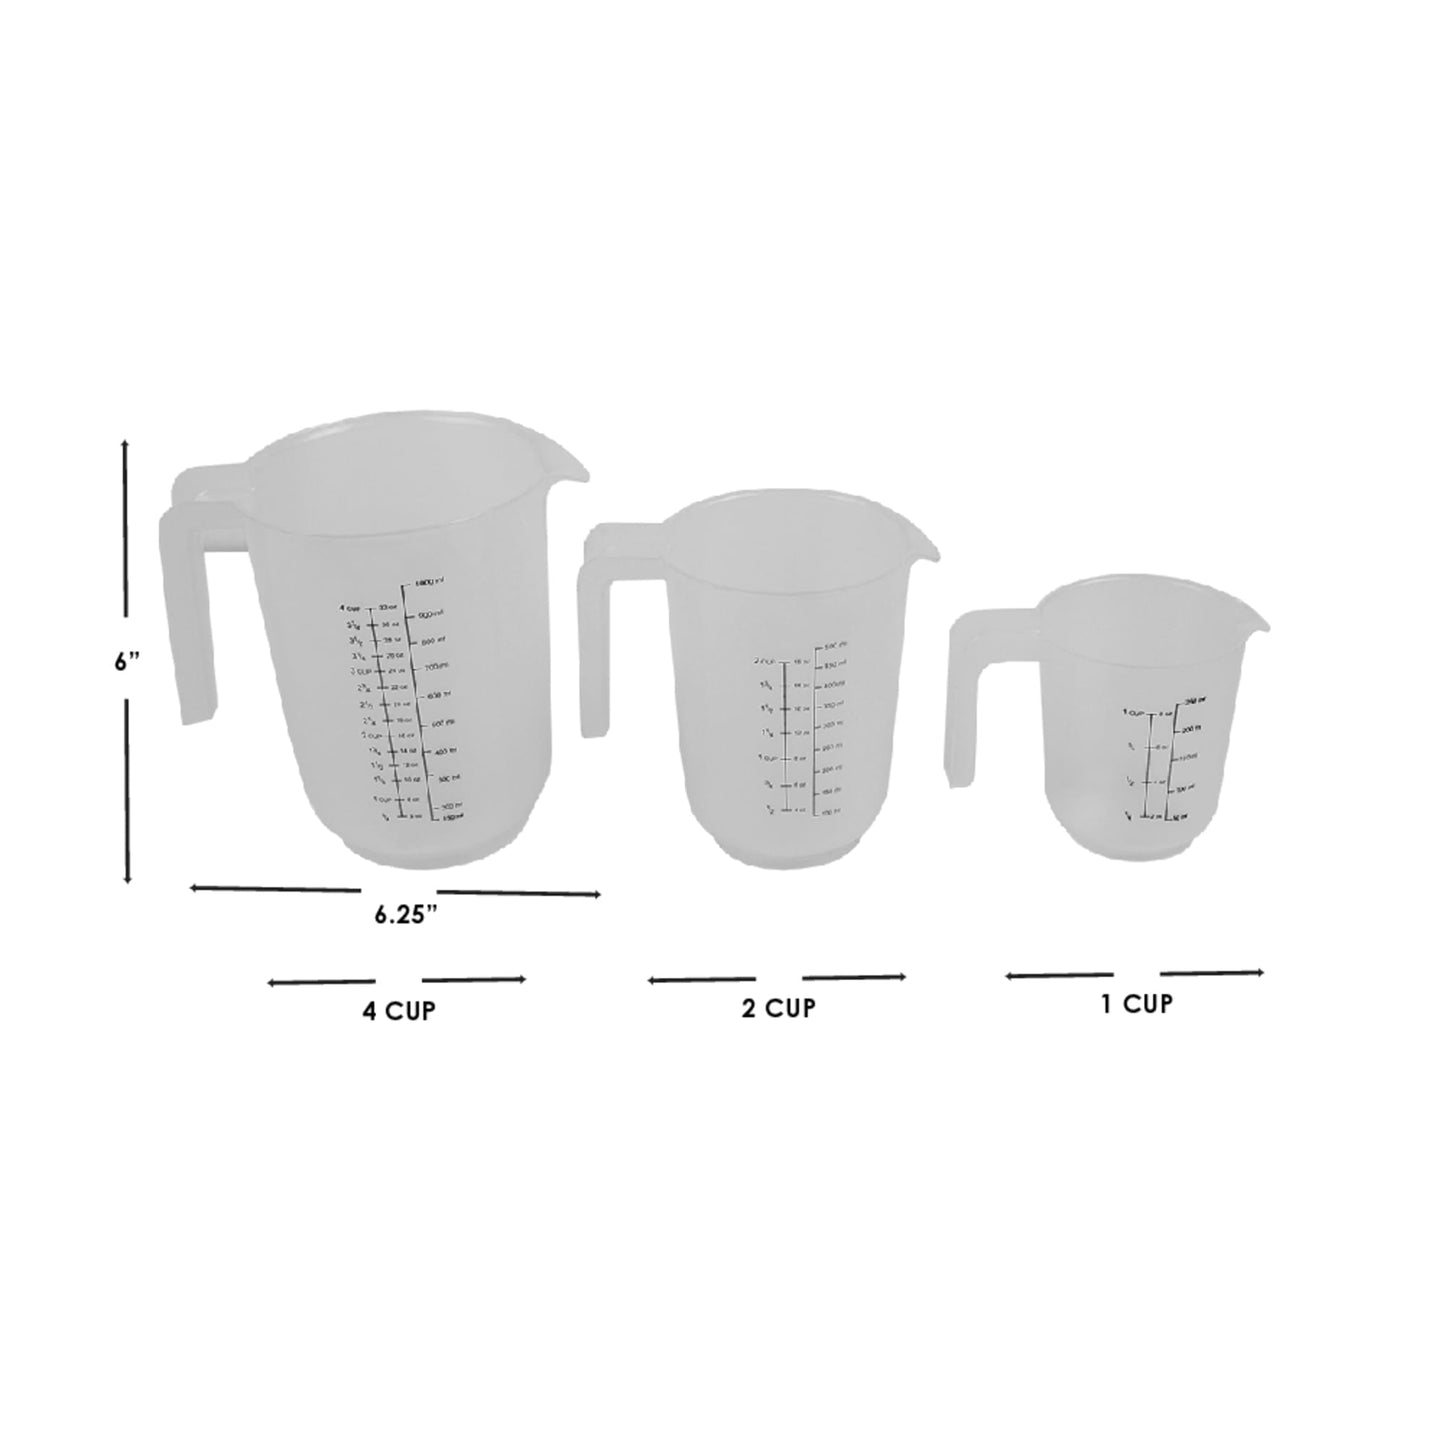 3 Piece Nesting Liquid Measuring Cups, Set of 3 and have Clear